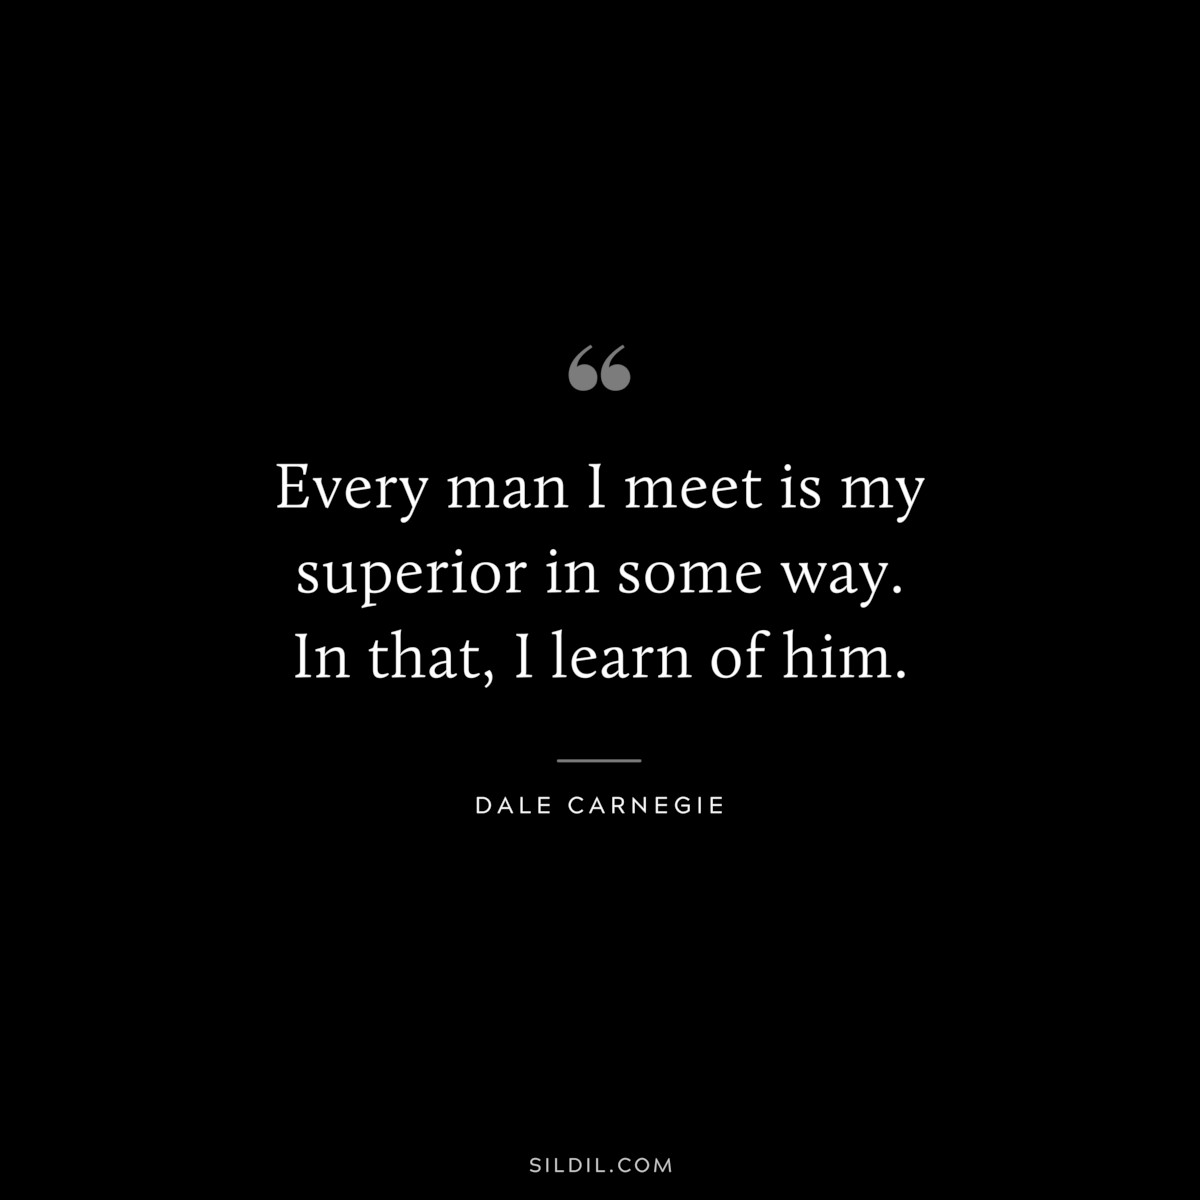 Every man I meet is my superior in some way. In that, I learn of him.― Dale Carnegie